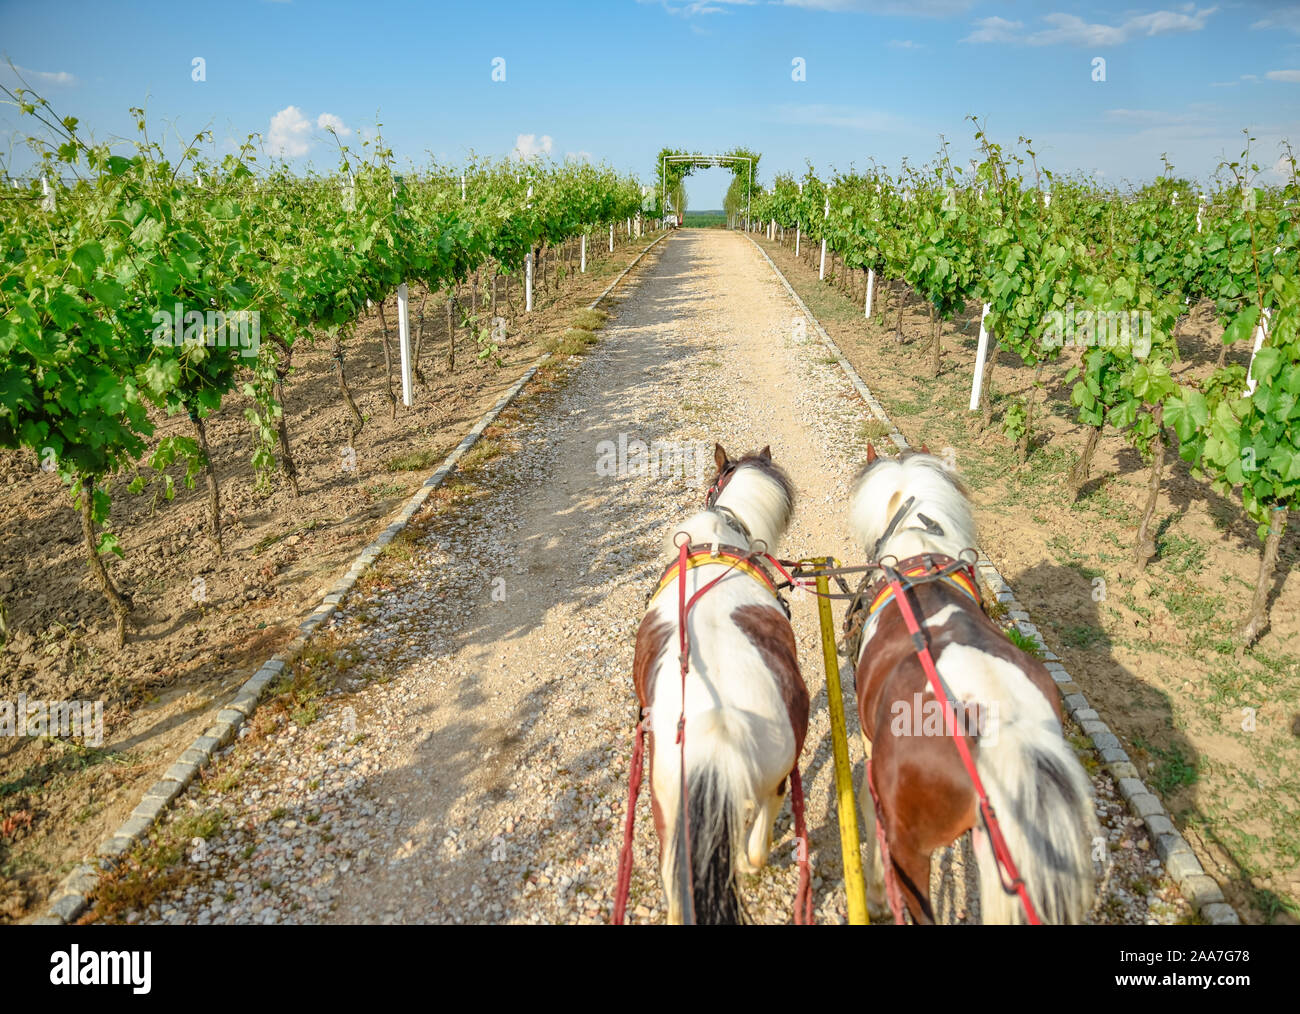 Two horses pulling a carriage trough the green vineyard on a sandy road as a tourist attraction for winery on a sunny afternoon in Vojvodina Serbia Stock Photo